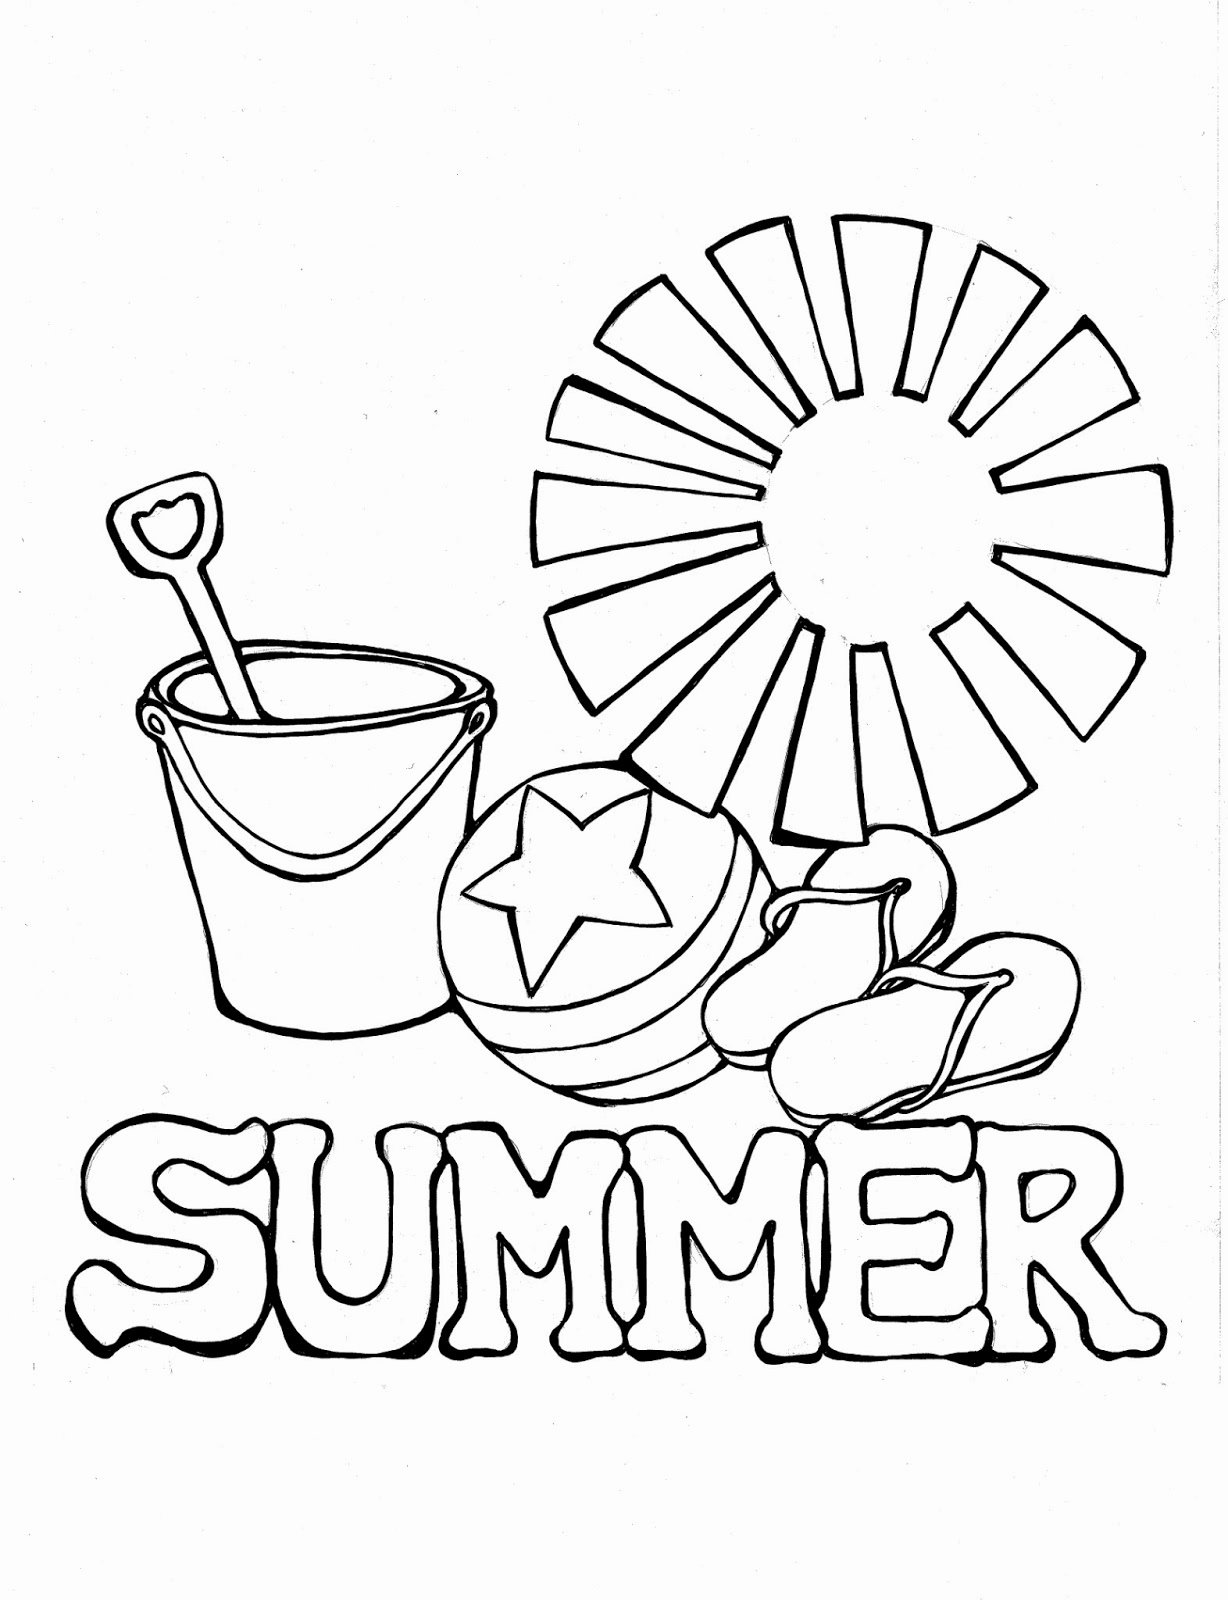 Coloring pages summer coloring pages for kids book worksheet preschool to print easy